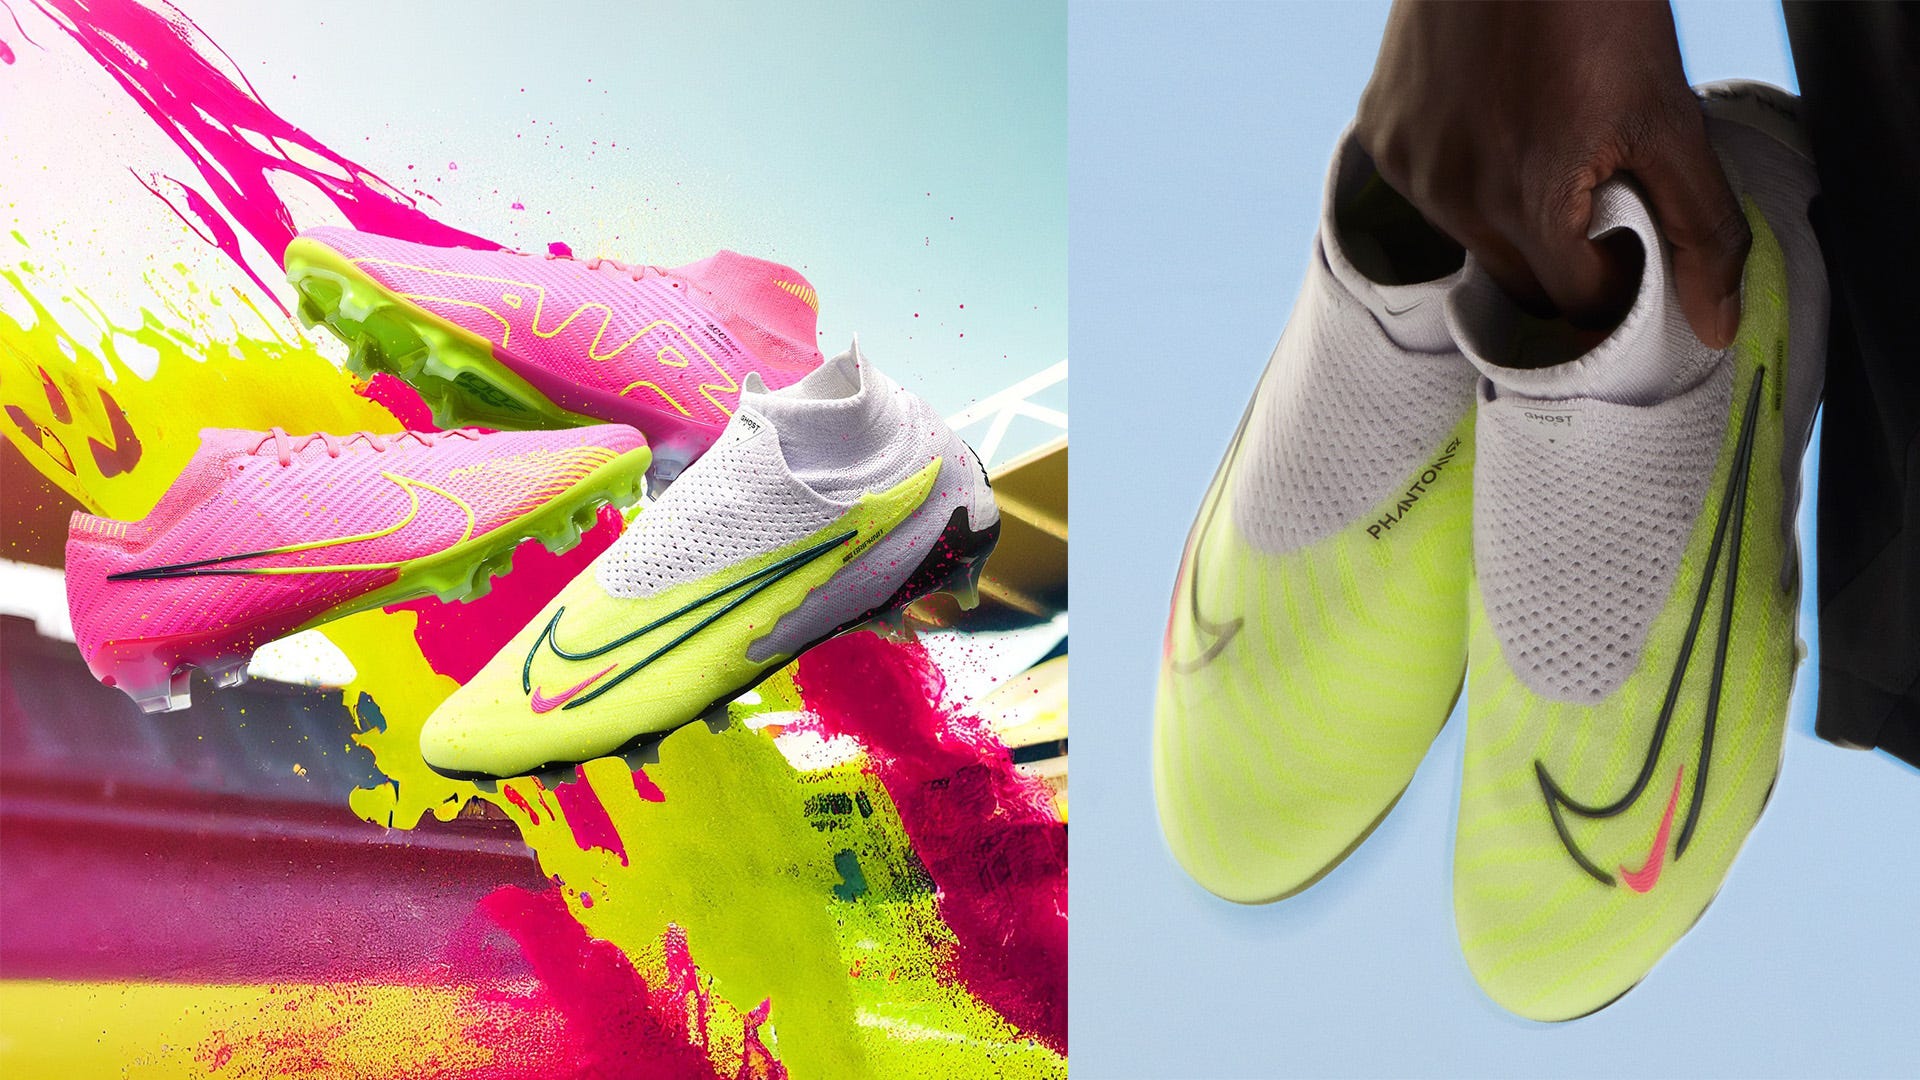 5 High Fashion-Footballer Collabs We Want to See Next - Urban Pitch